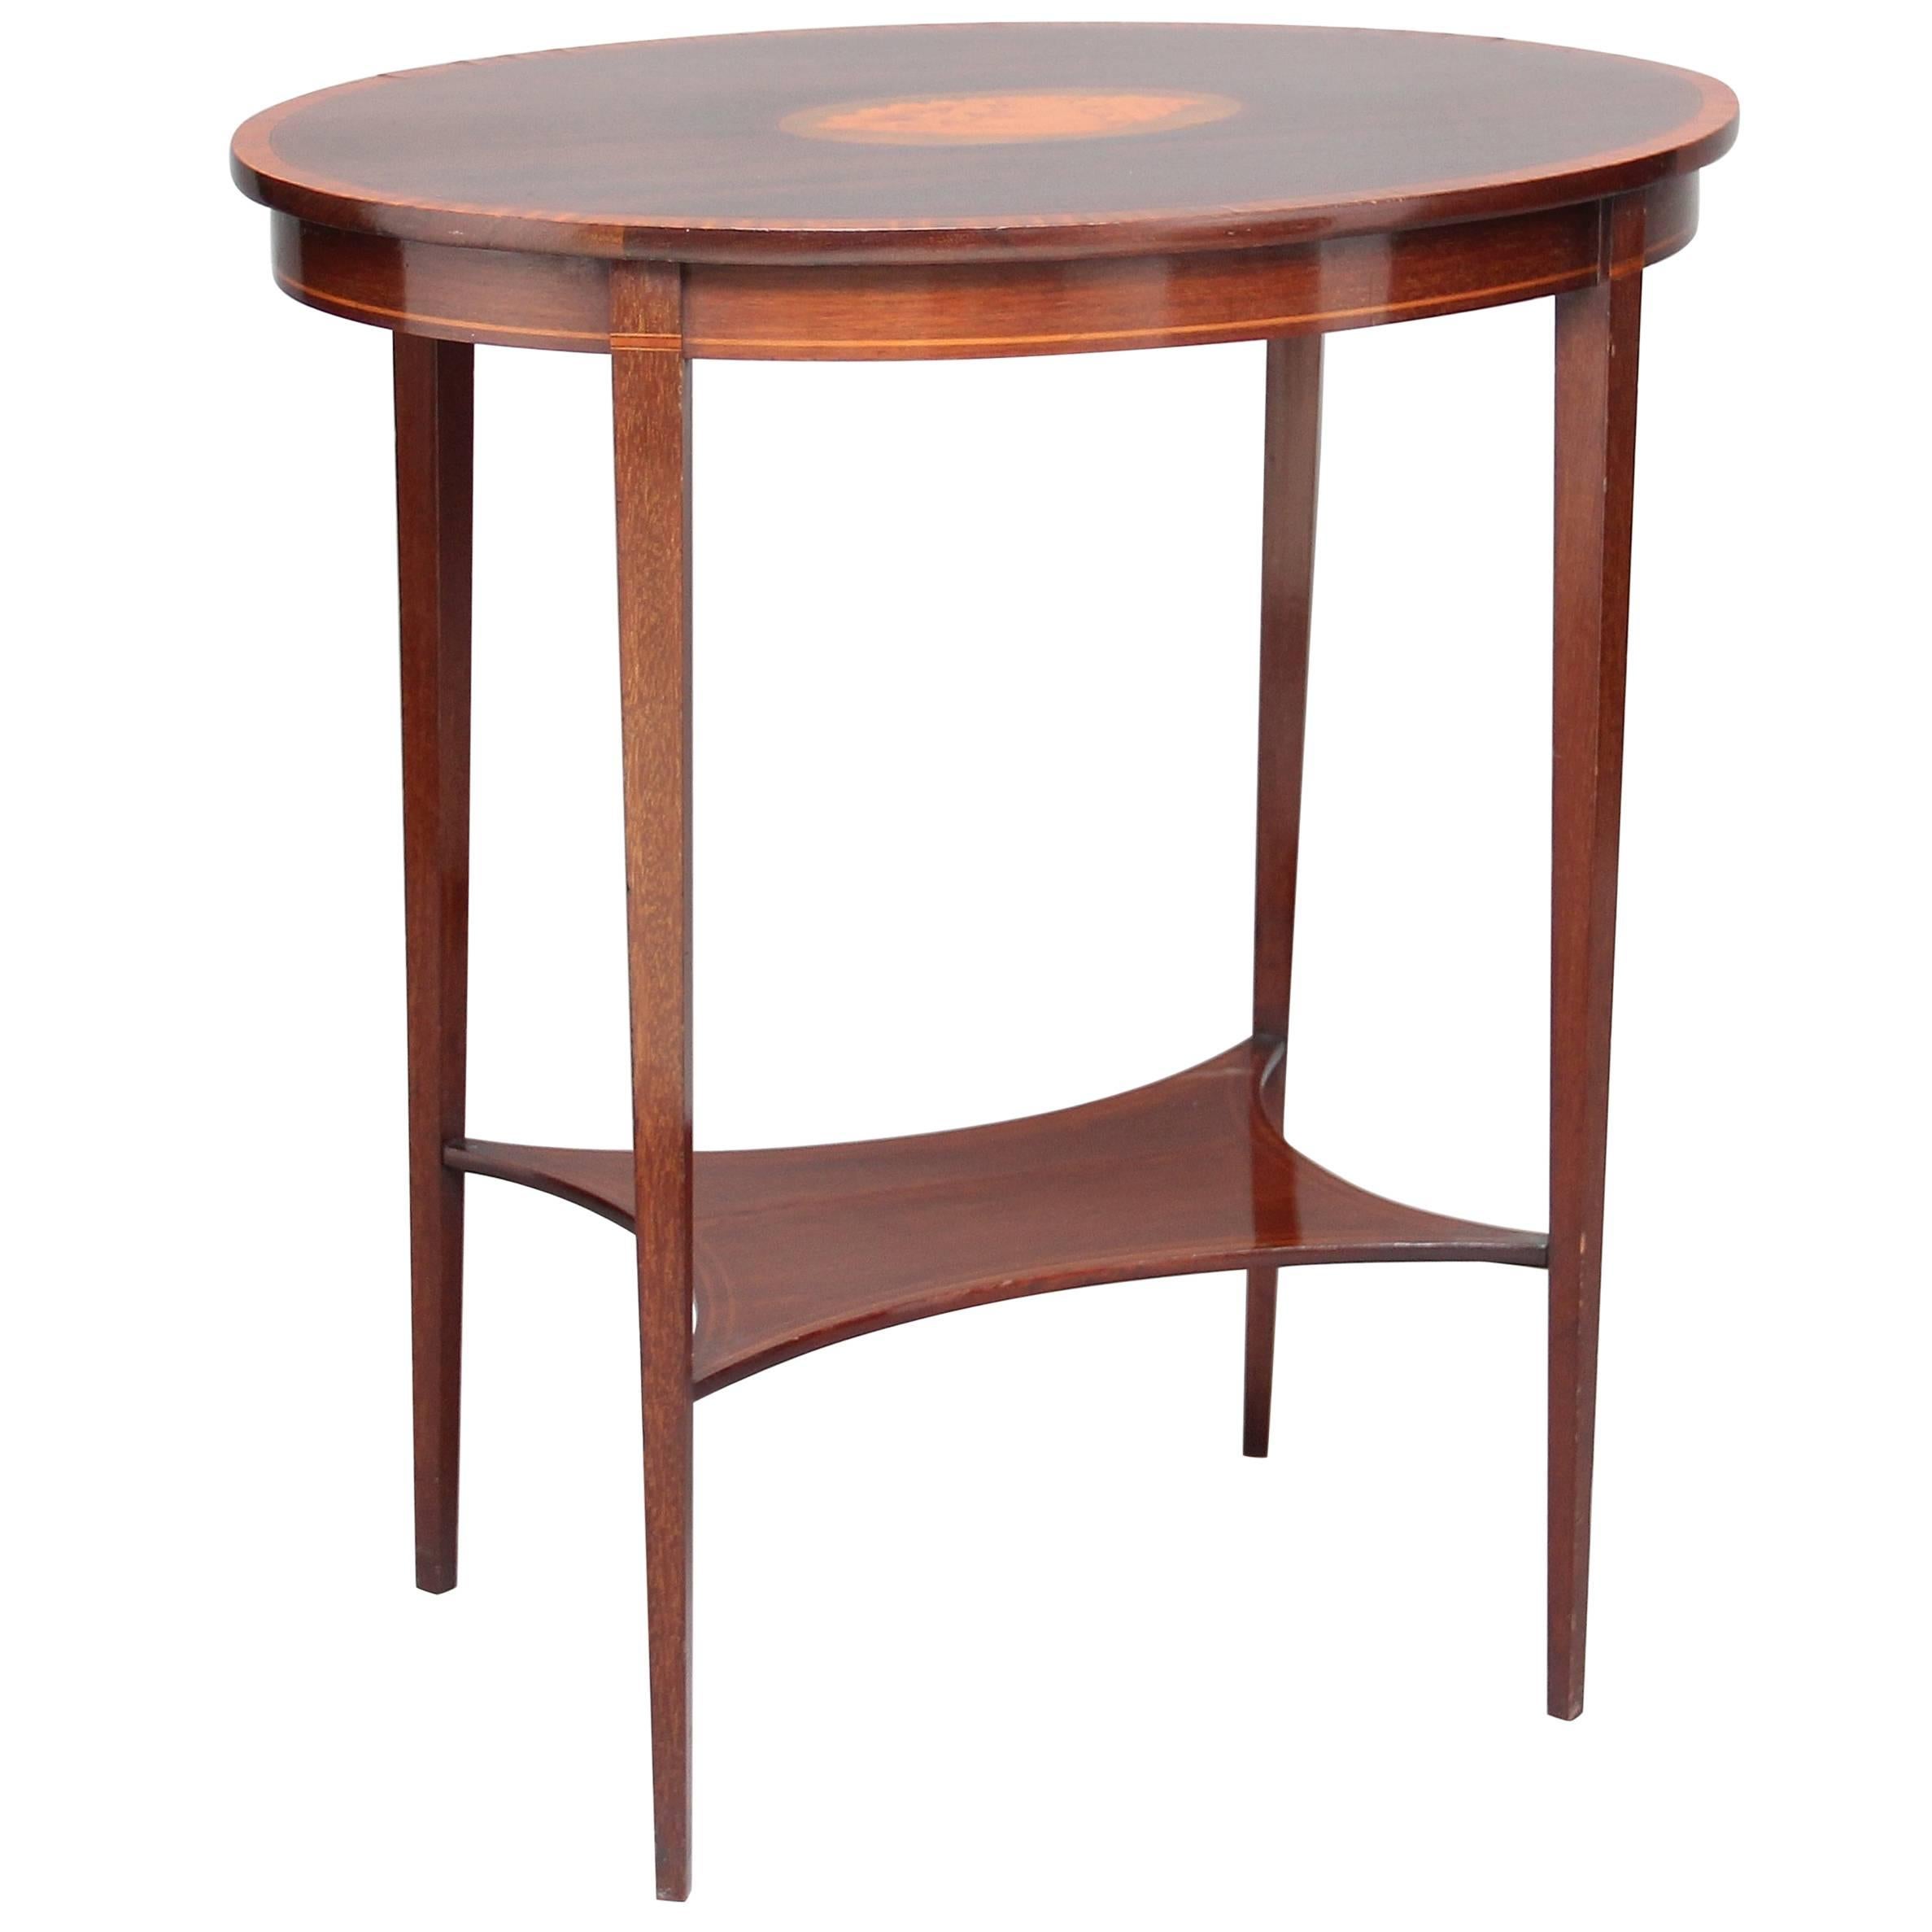 Early 20th Century Mahogany Occasional Table